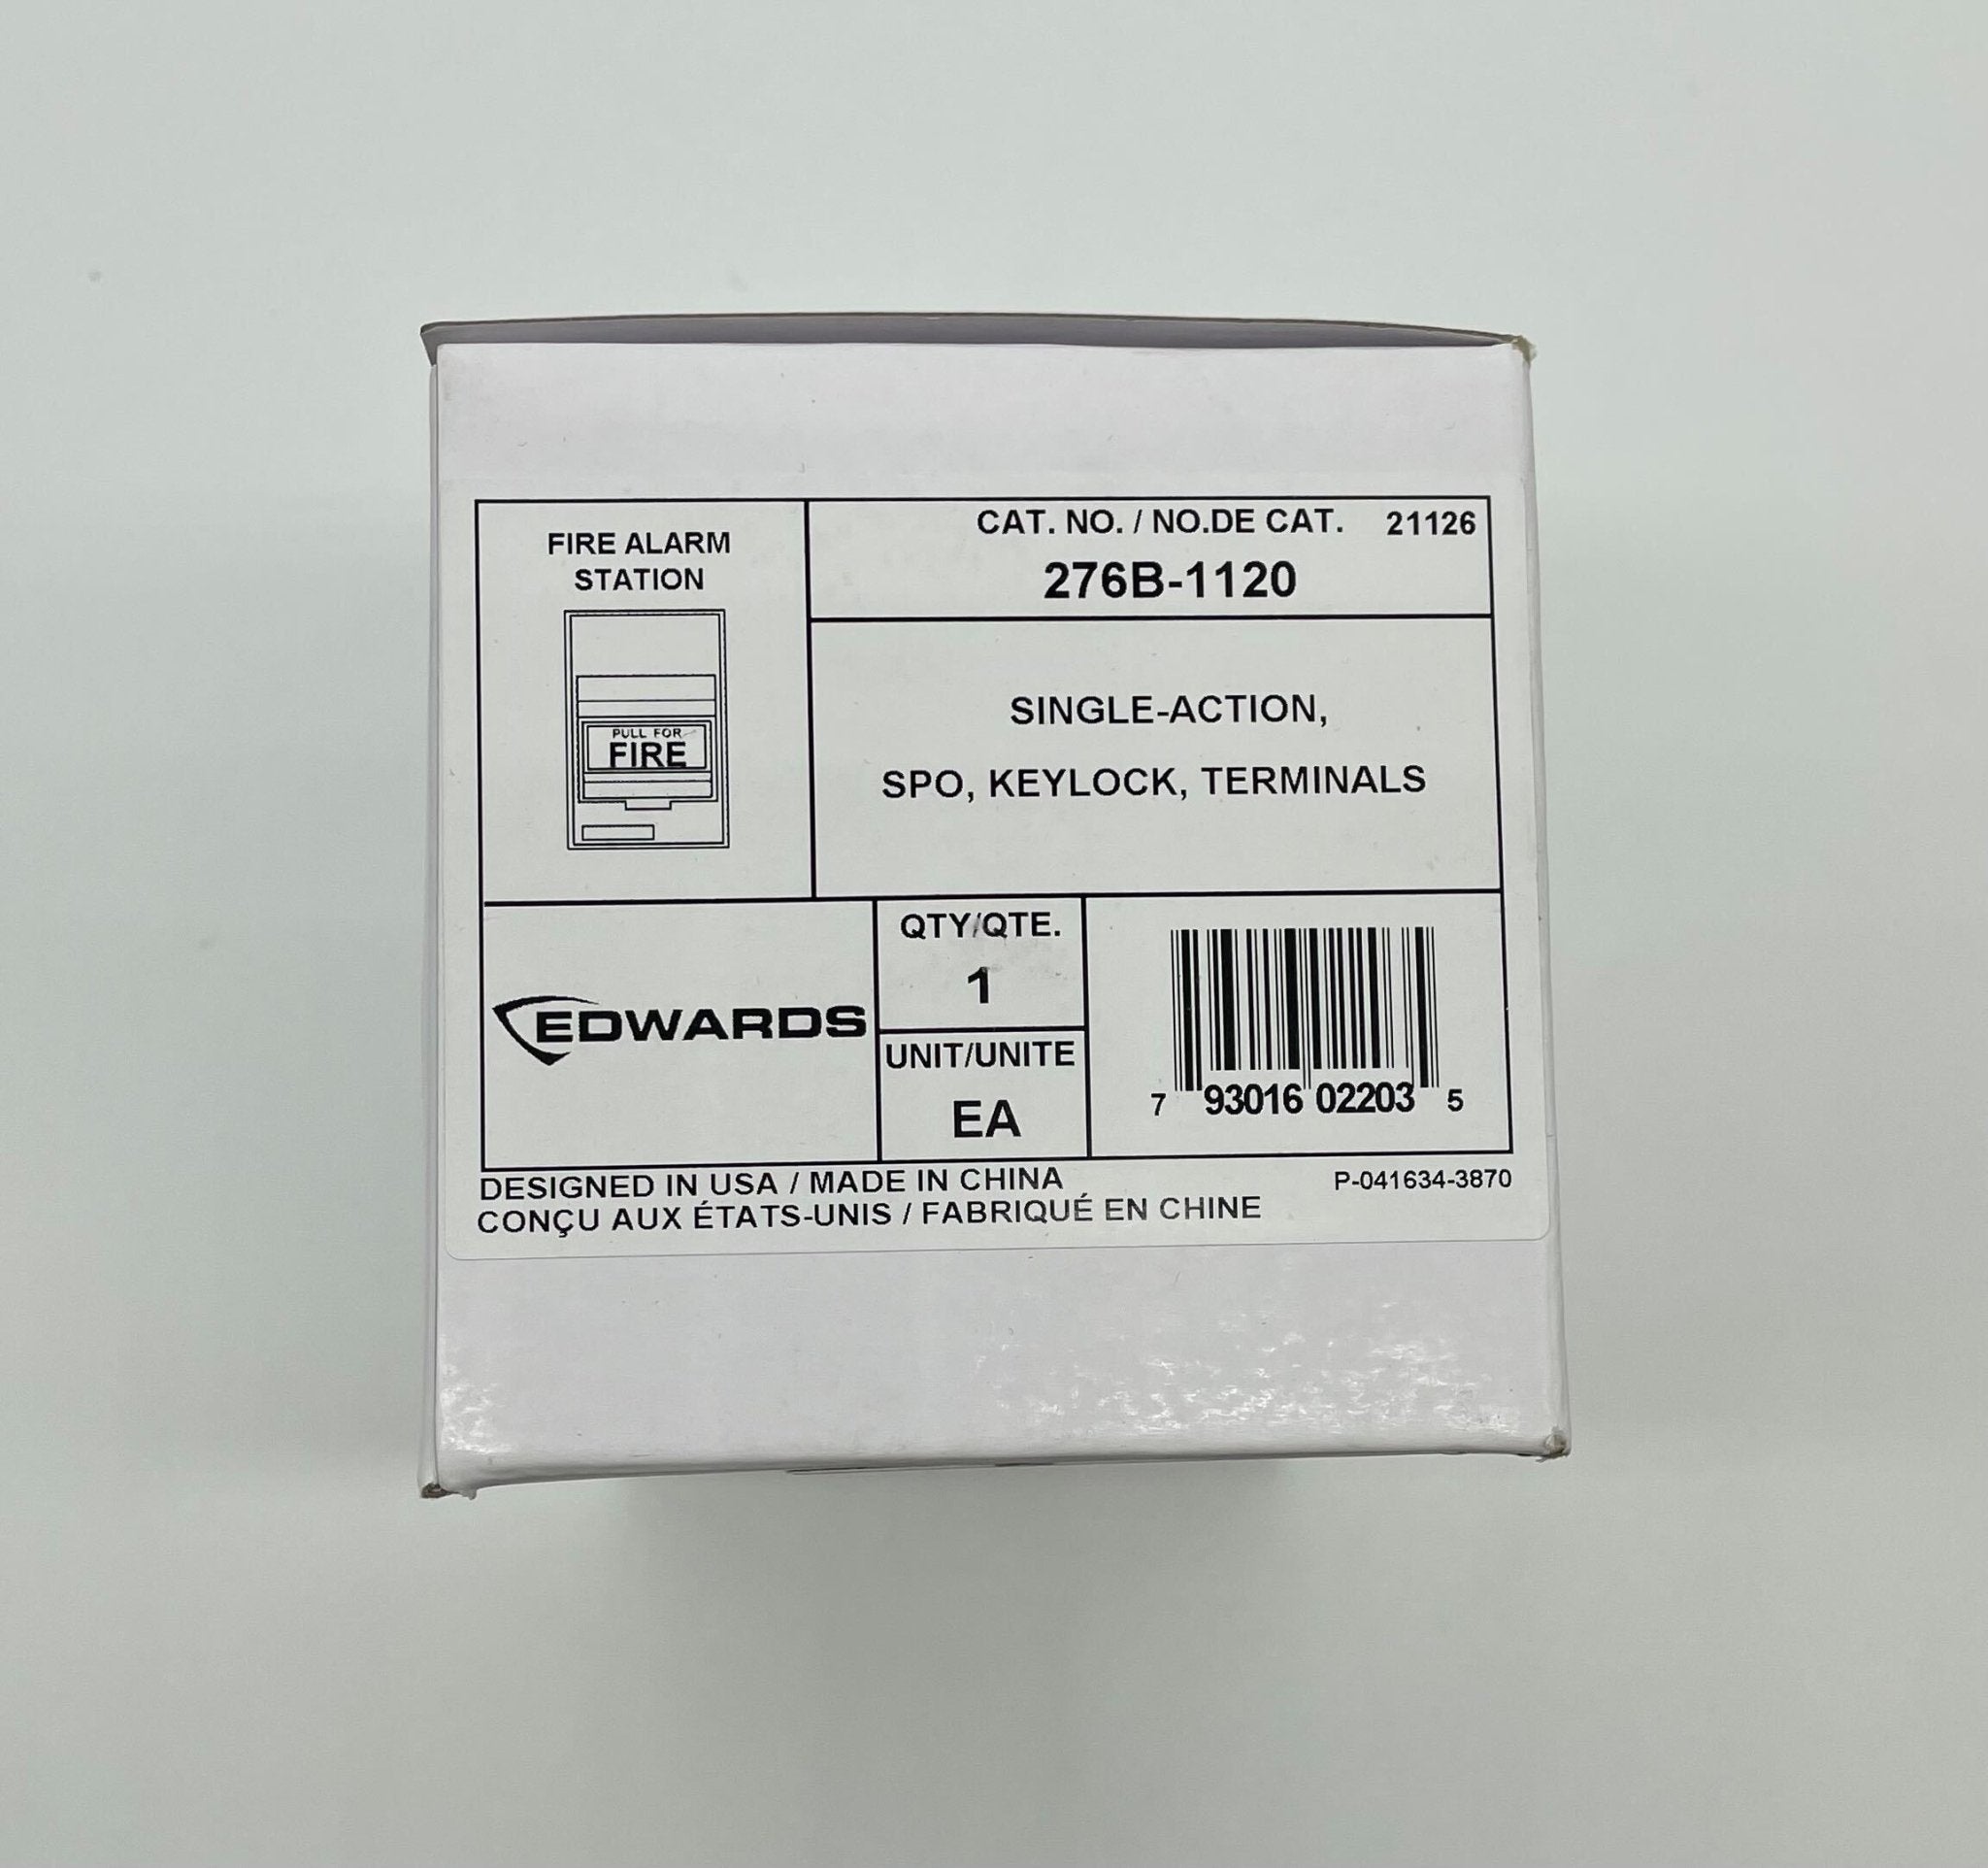 Edwards 276B-1120 - The Fire Alarm Supplier